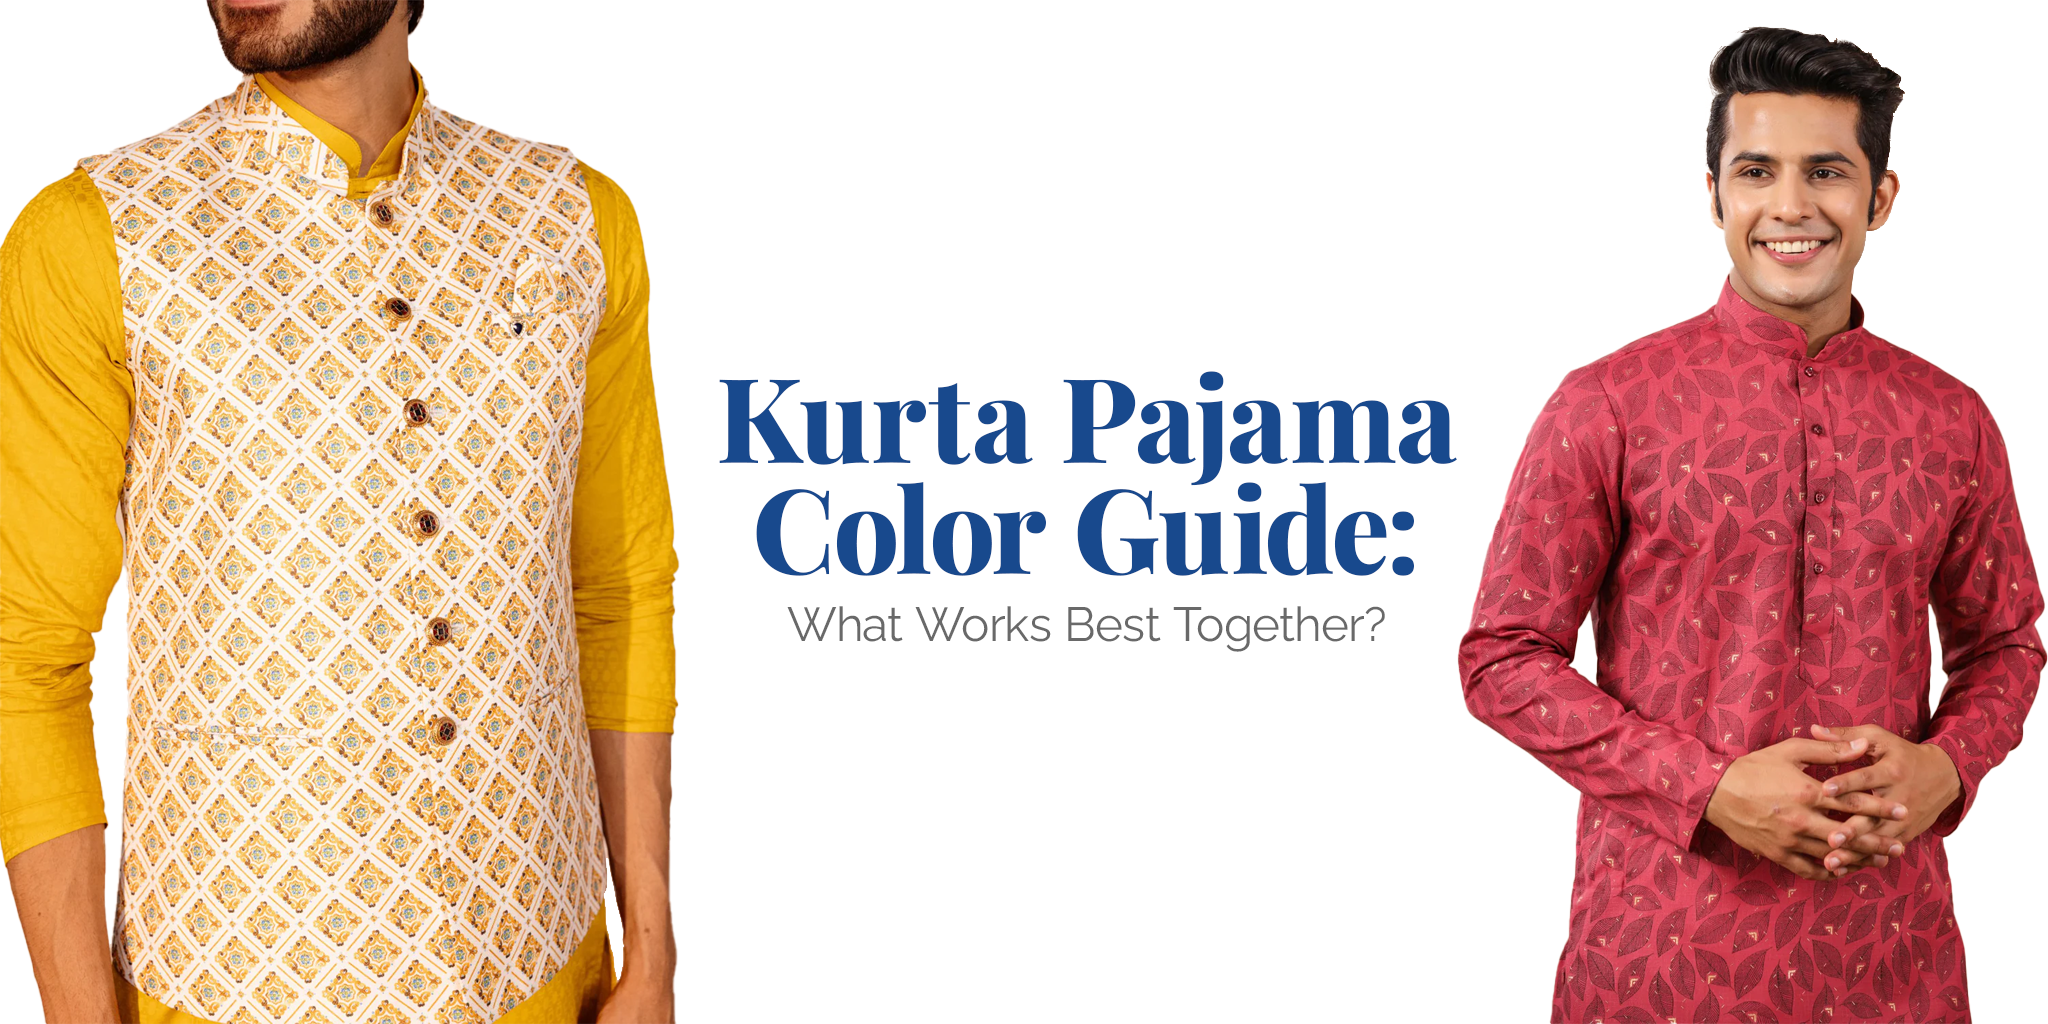 Kurta Pajama Color Guide: What Works Best Together?